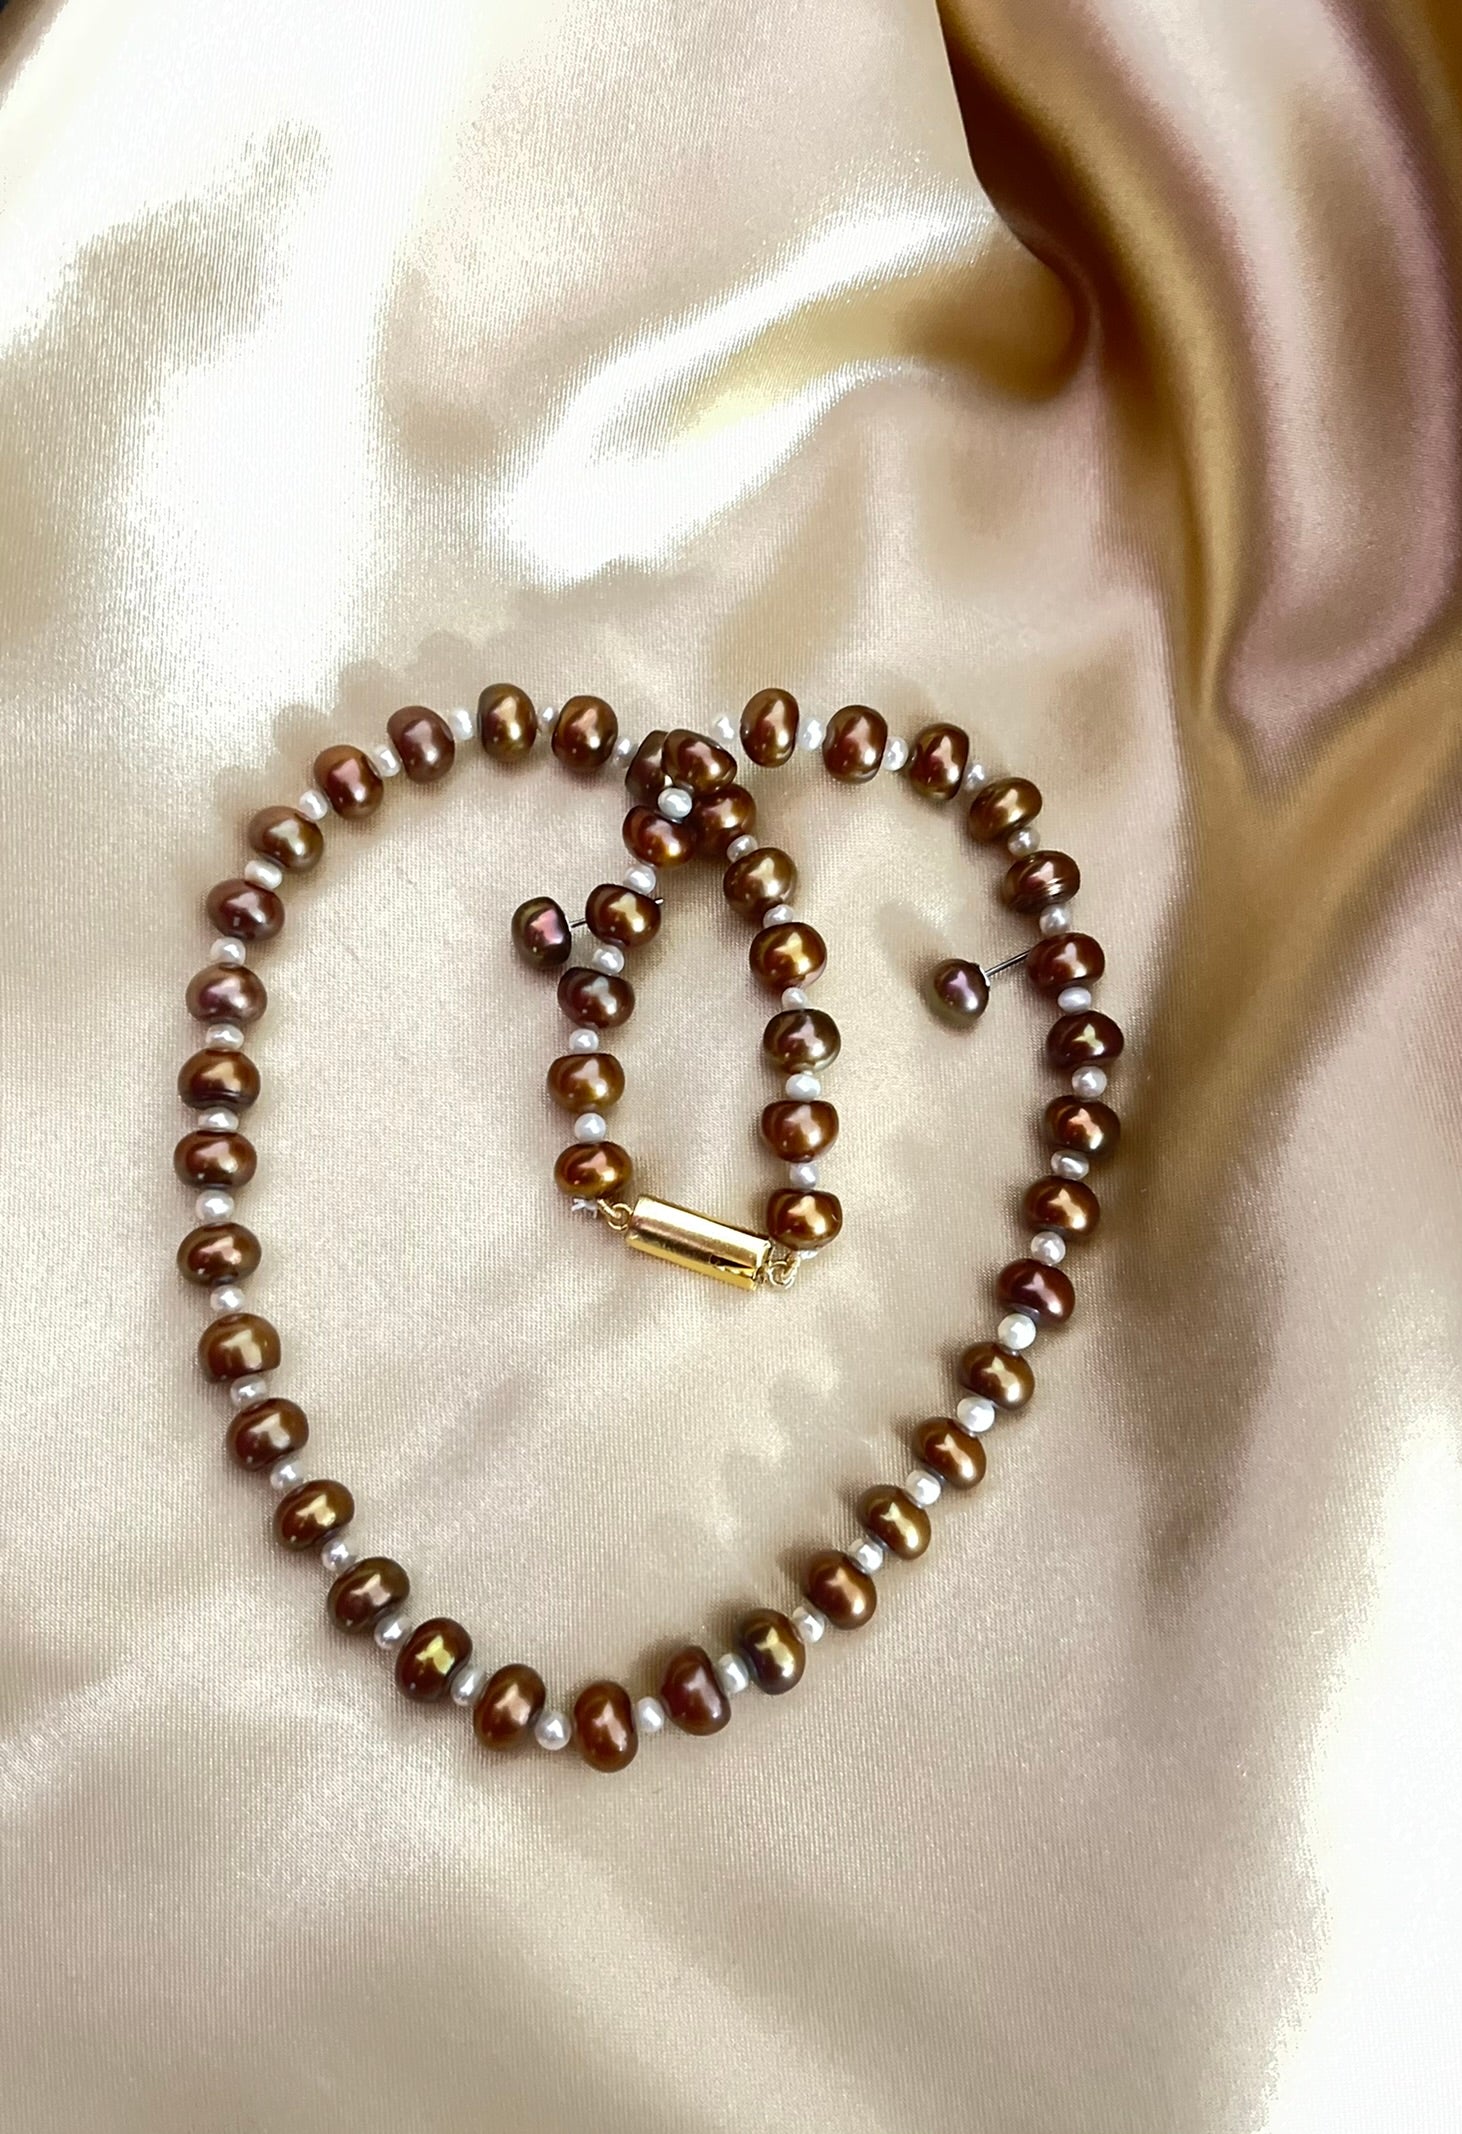 14-16mm Golden South Sea Pearl Necklace - AAAA Quality - Pearls of Joy